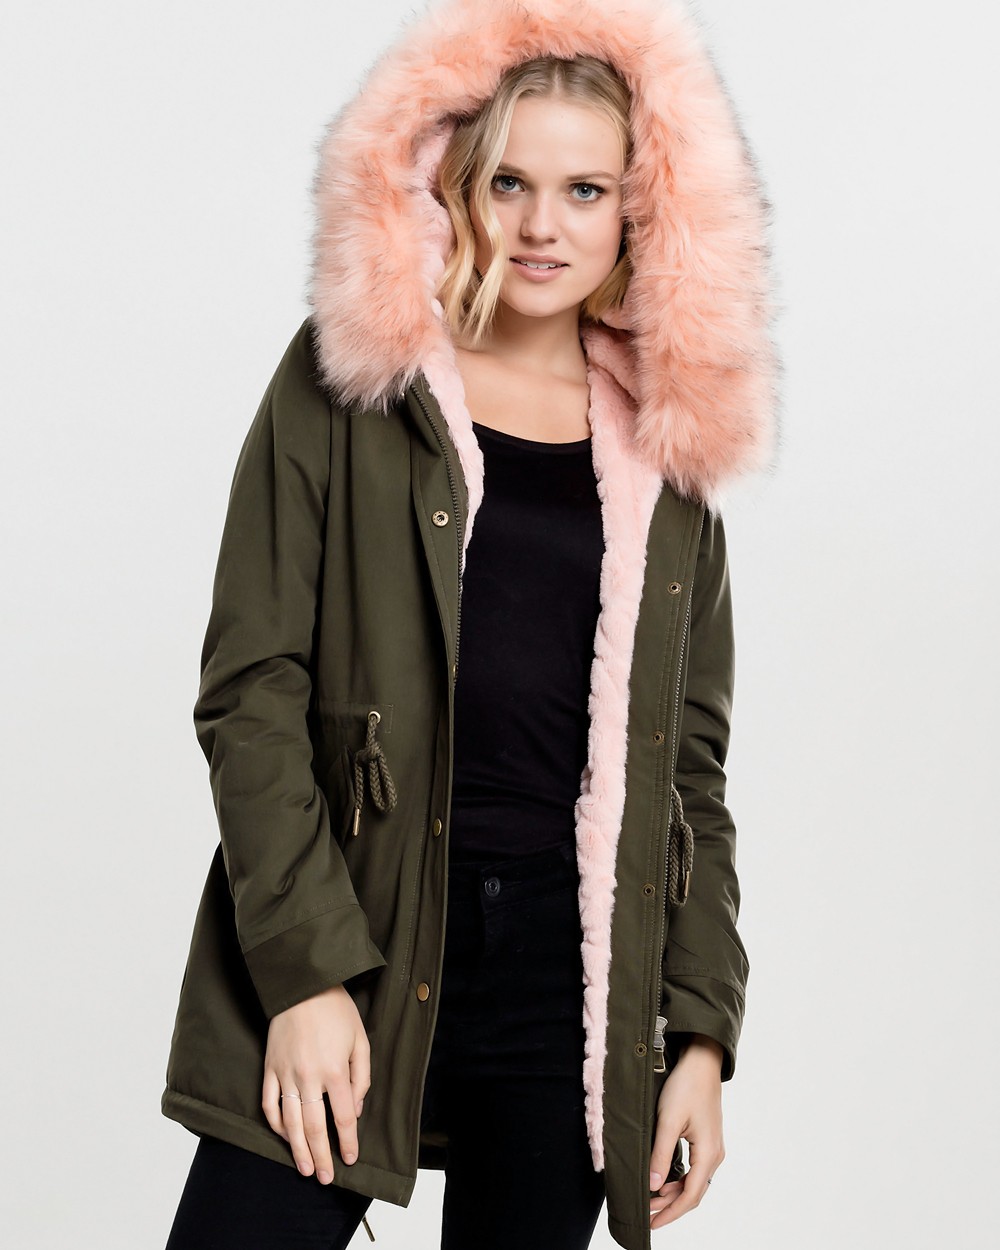 Winter jacket with teddy lining pink teddy lined parka olive - winter jacket BDYNZNX